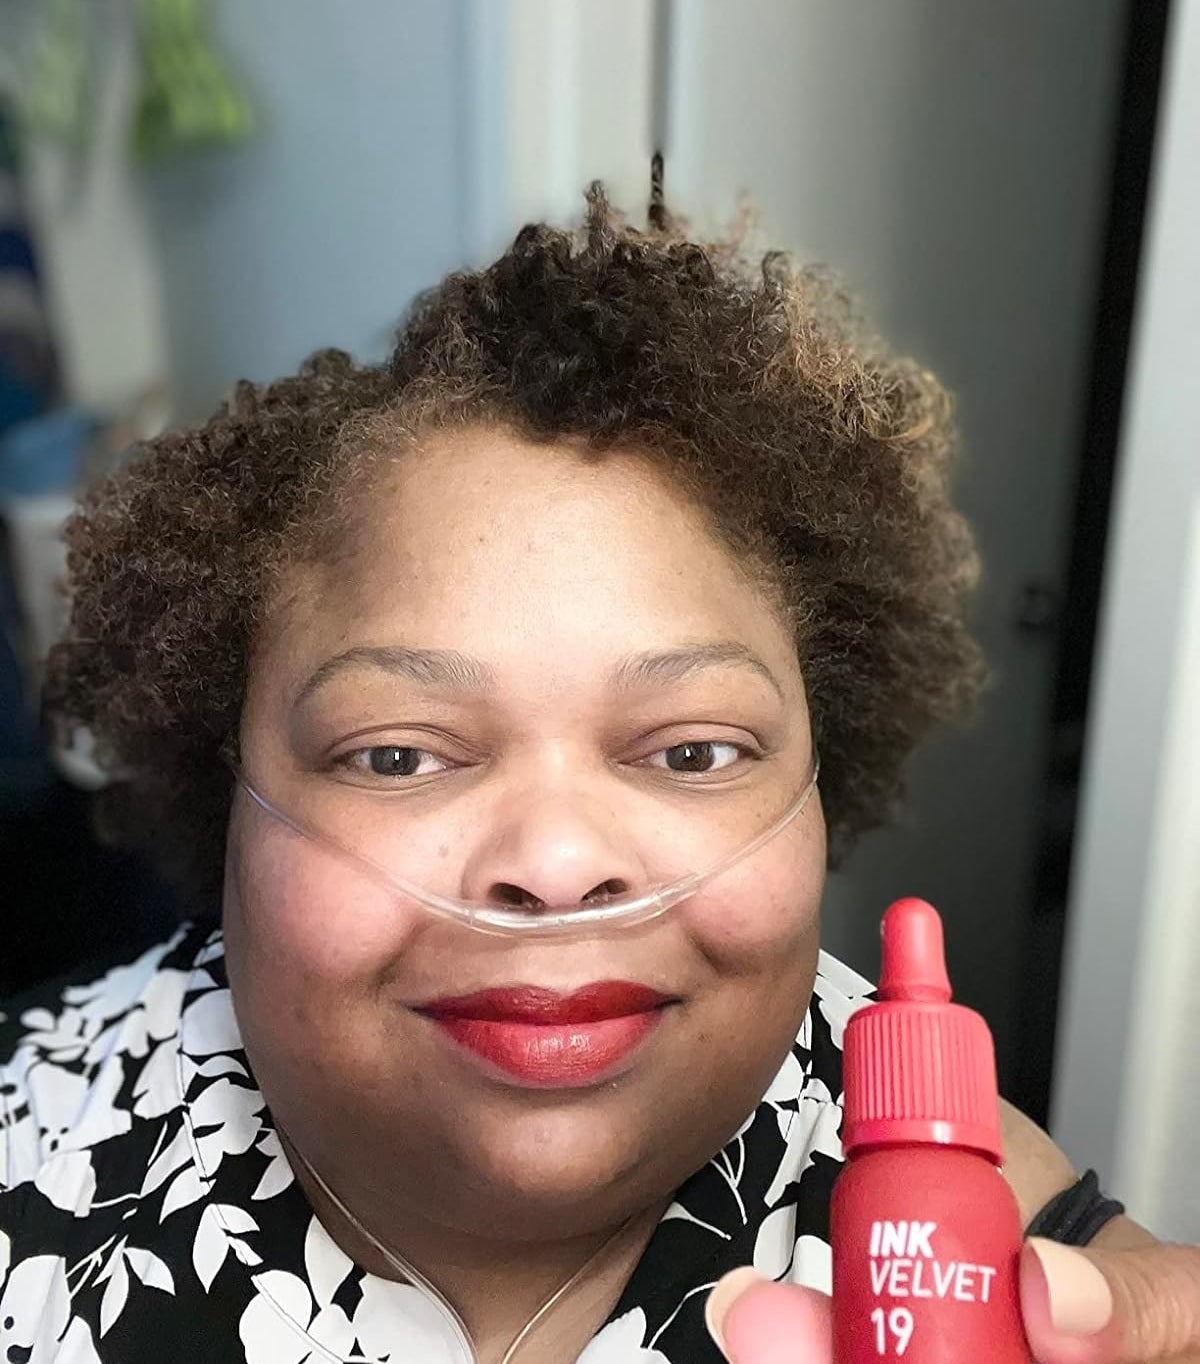 reviewer wearing and holding red lippie